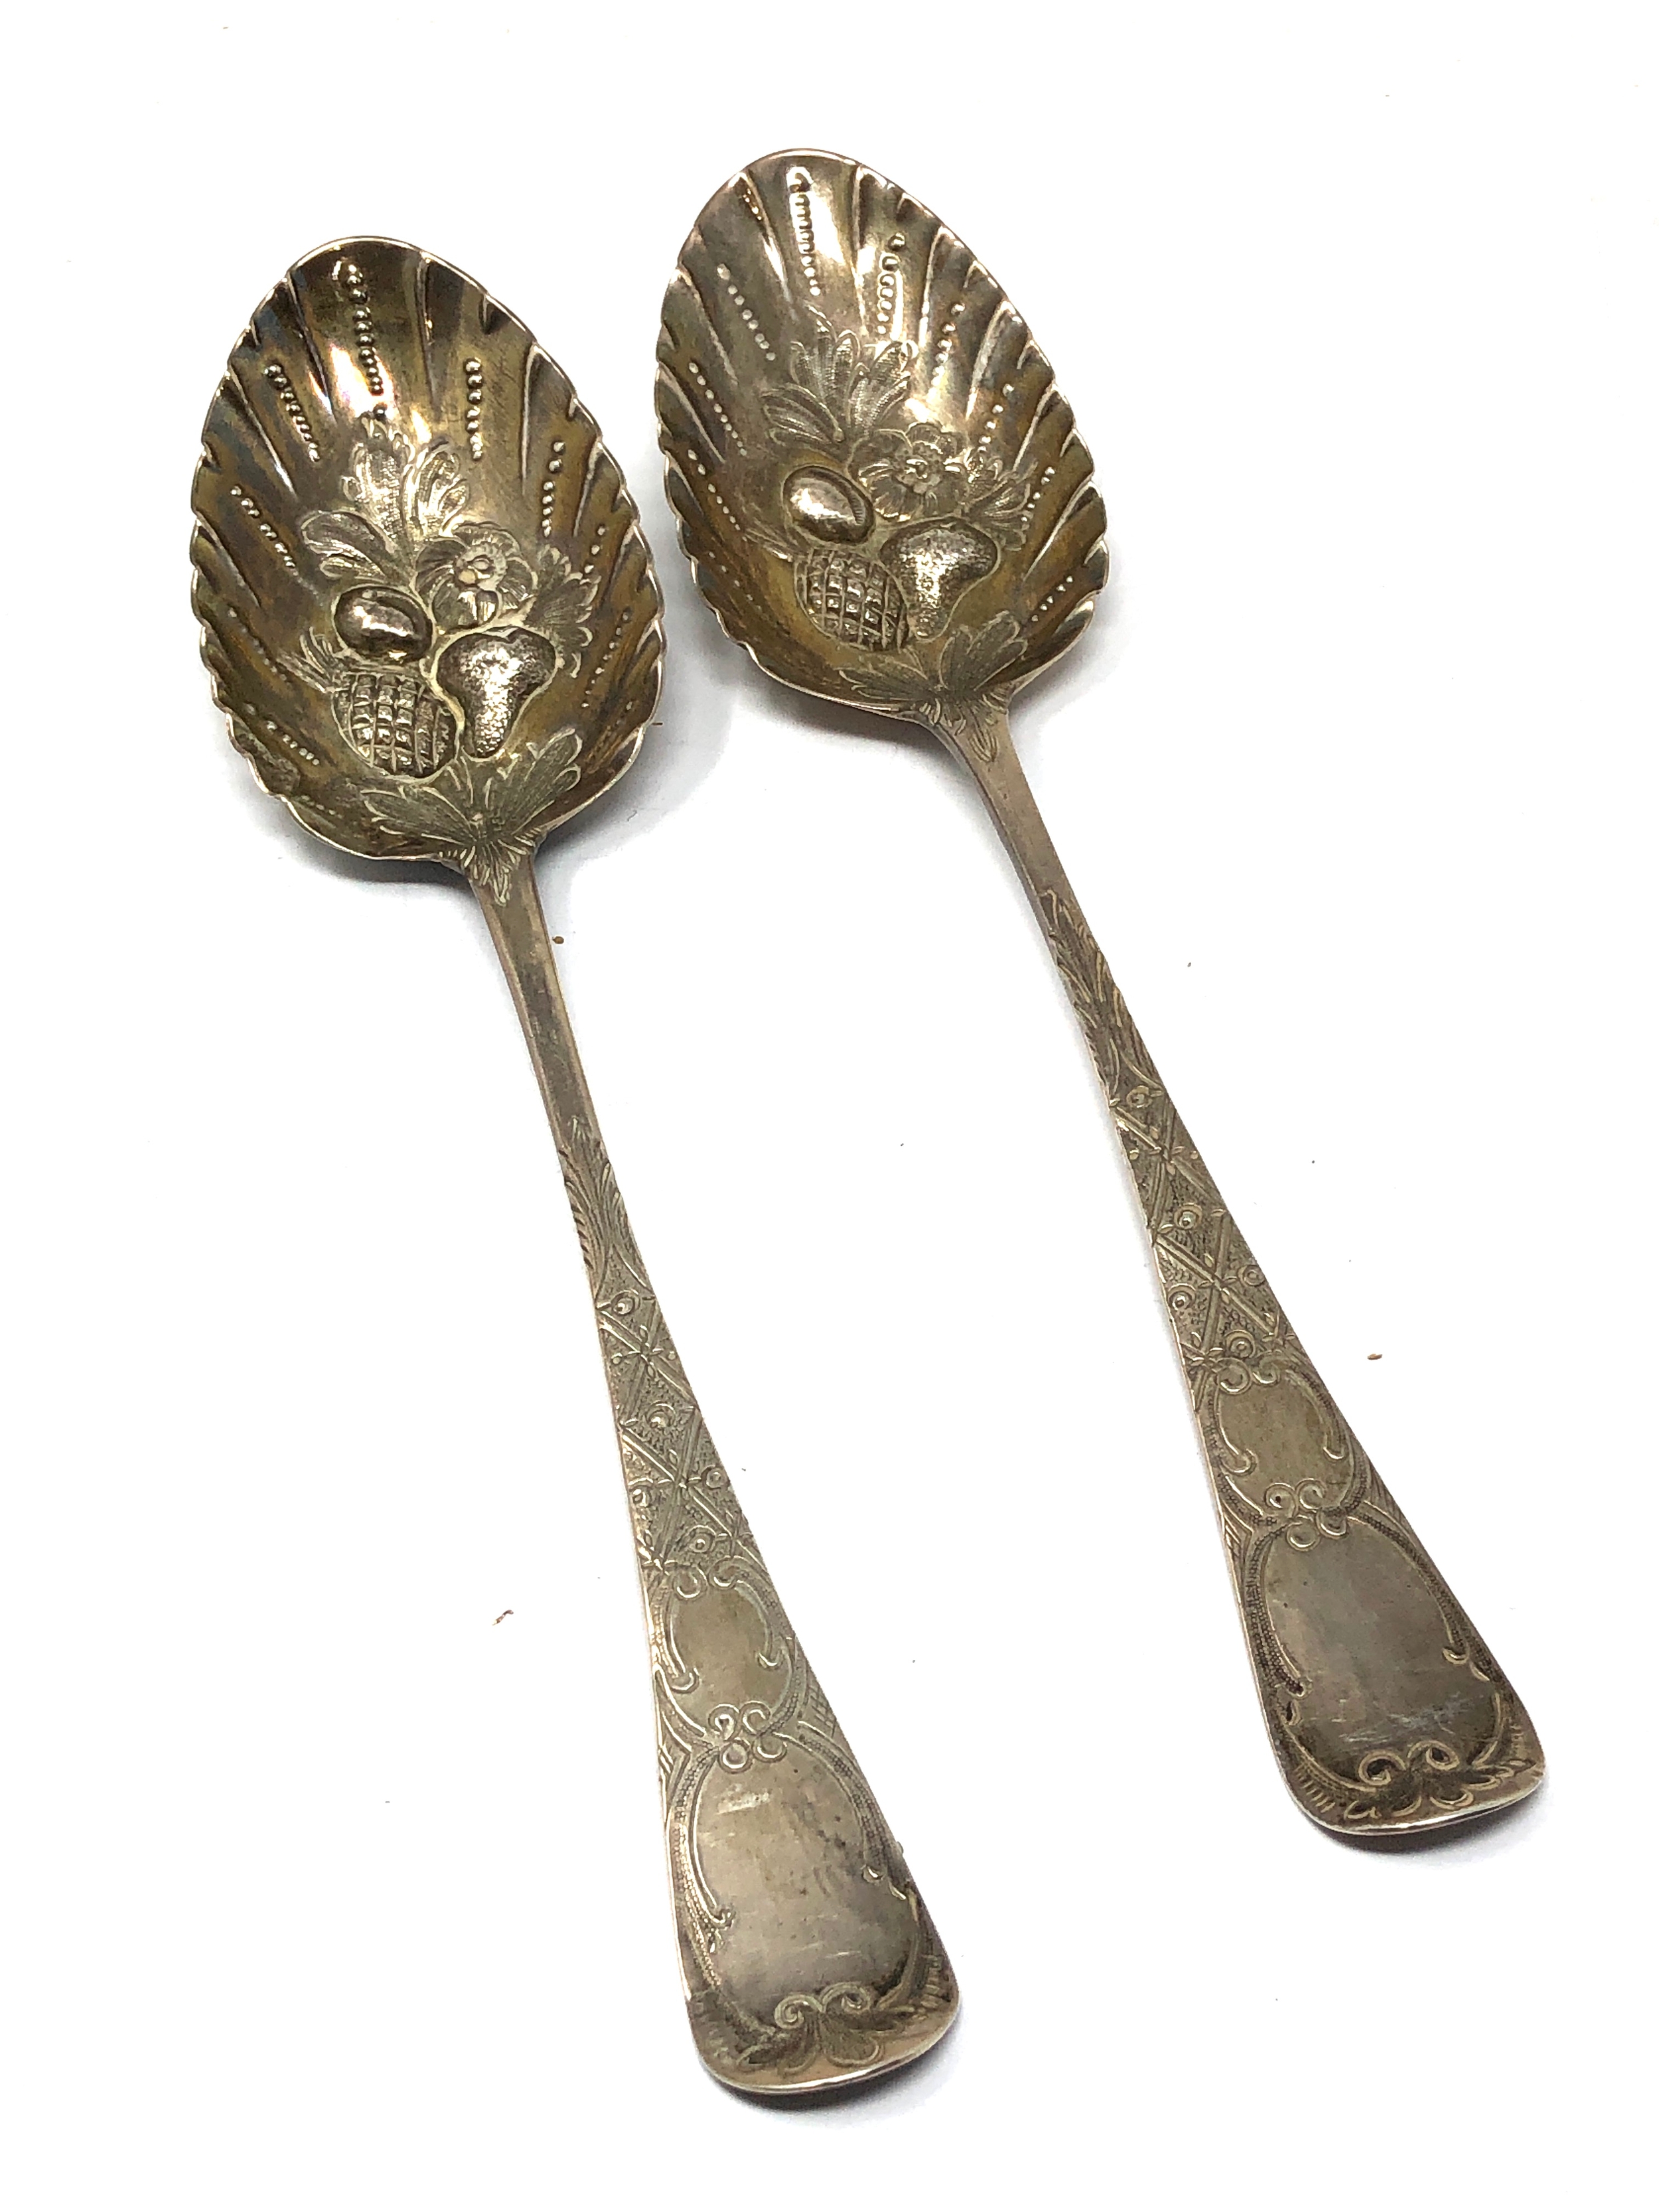 Pair of georgian silver berry serving spoons London silver hallmarks weight 104g